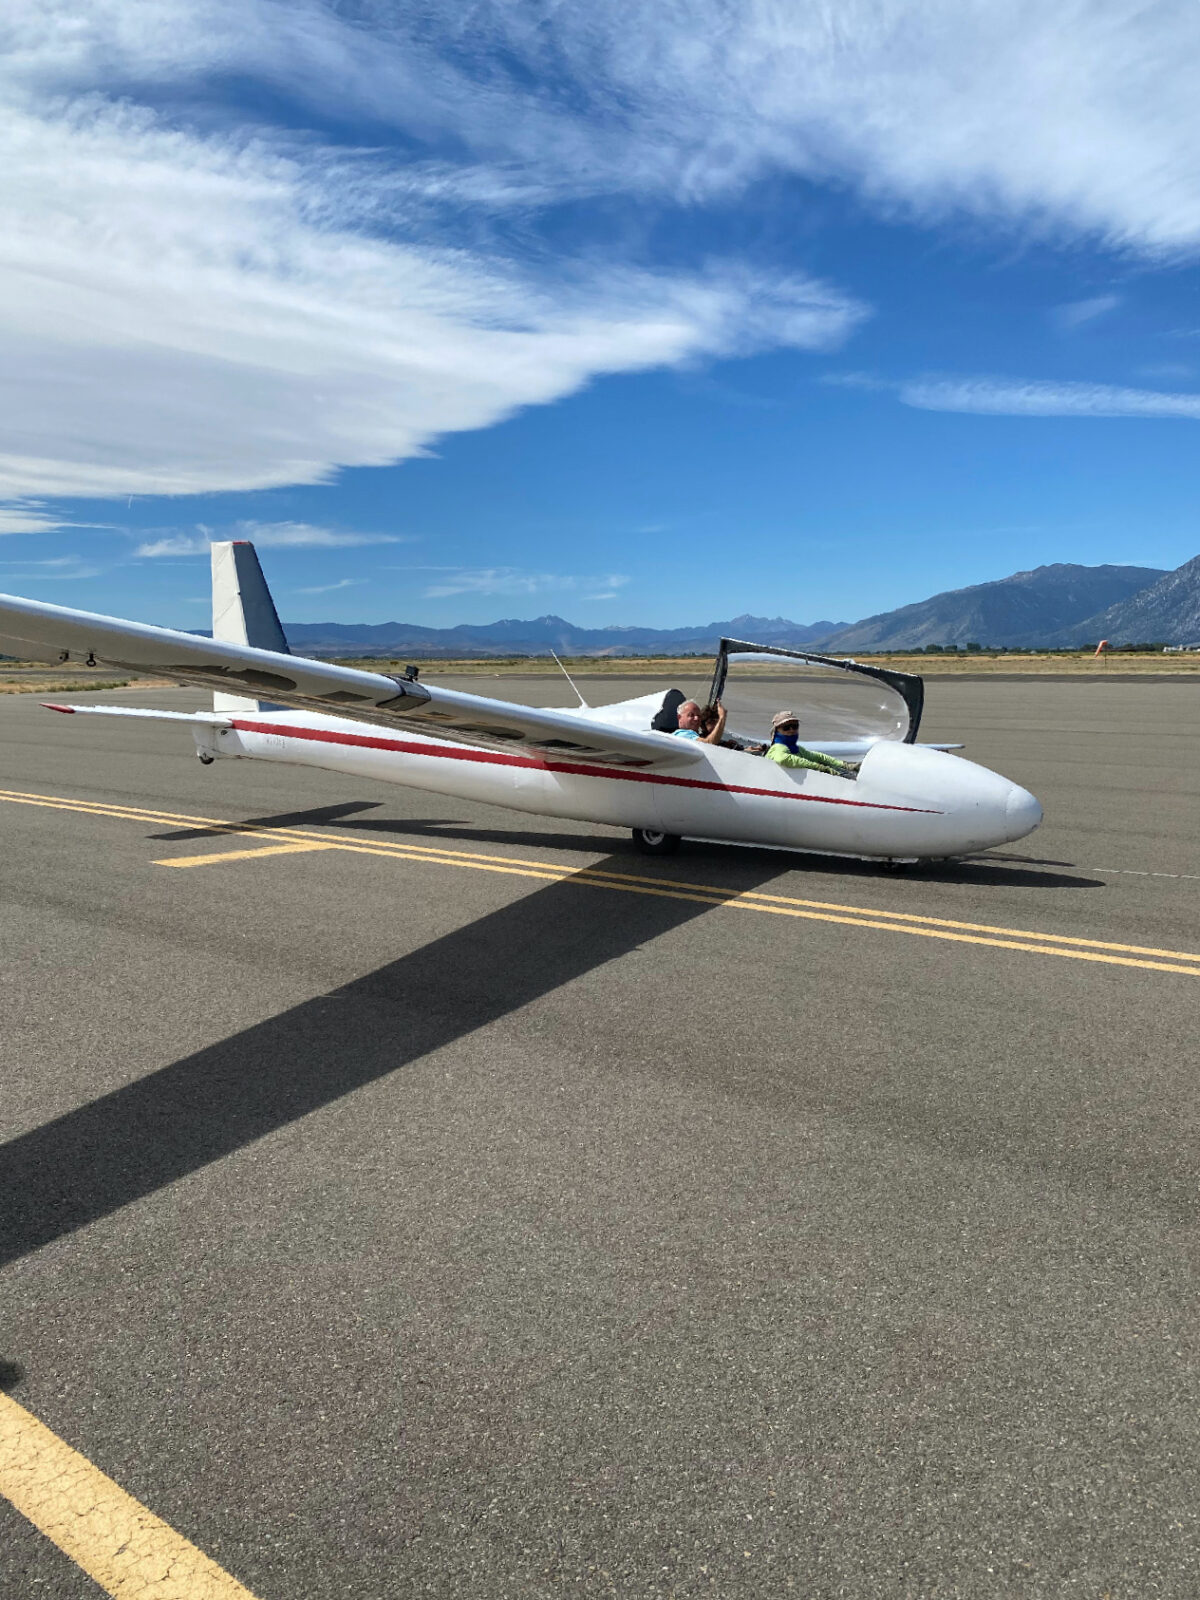 A glider plane waits for takeoff for a bird's-eye view of Carson Valley, Nevada. (Photo Courtesy of Margot Black.)